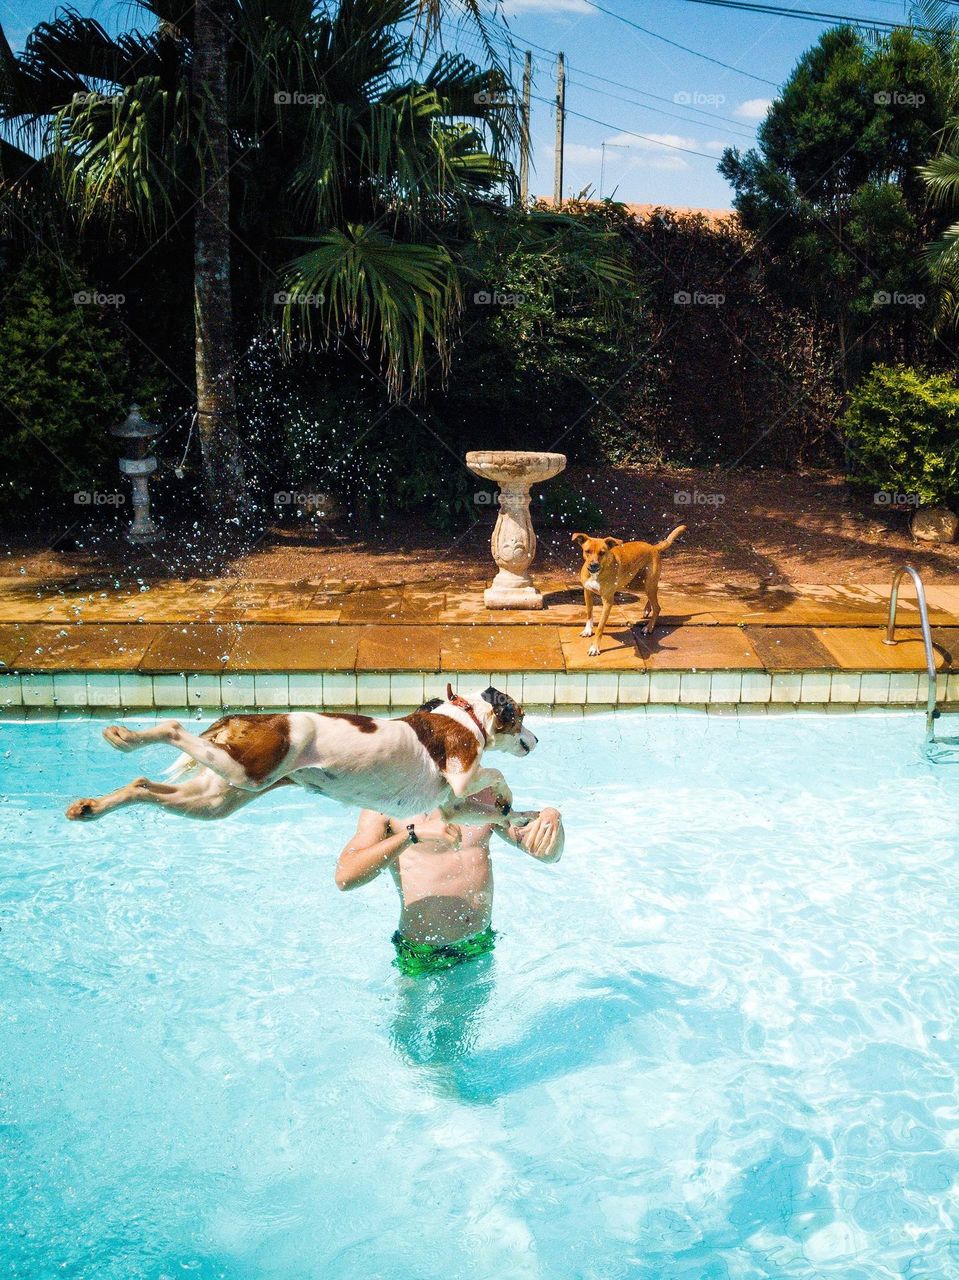 Beautiful photo of a white dog jumping, diving in a blue pool. There's a strong man inside the pool and another dog on the side. Beautiful summertime photo.